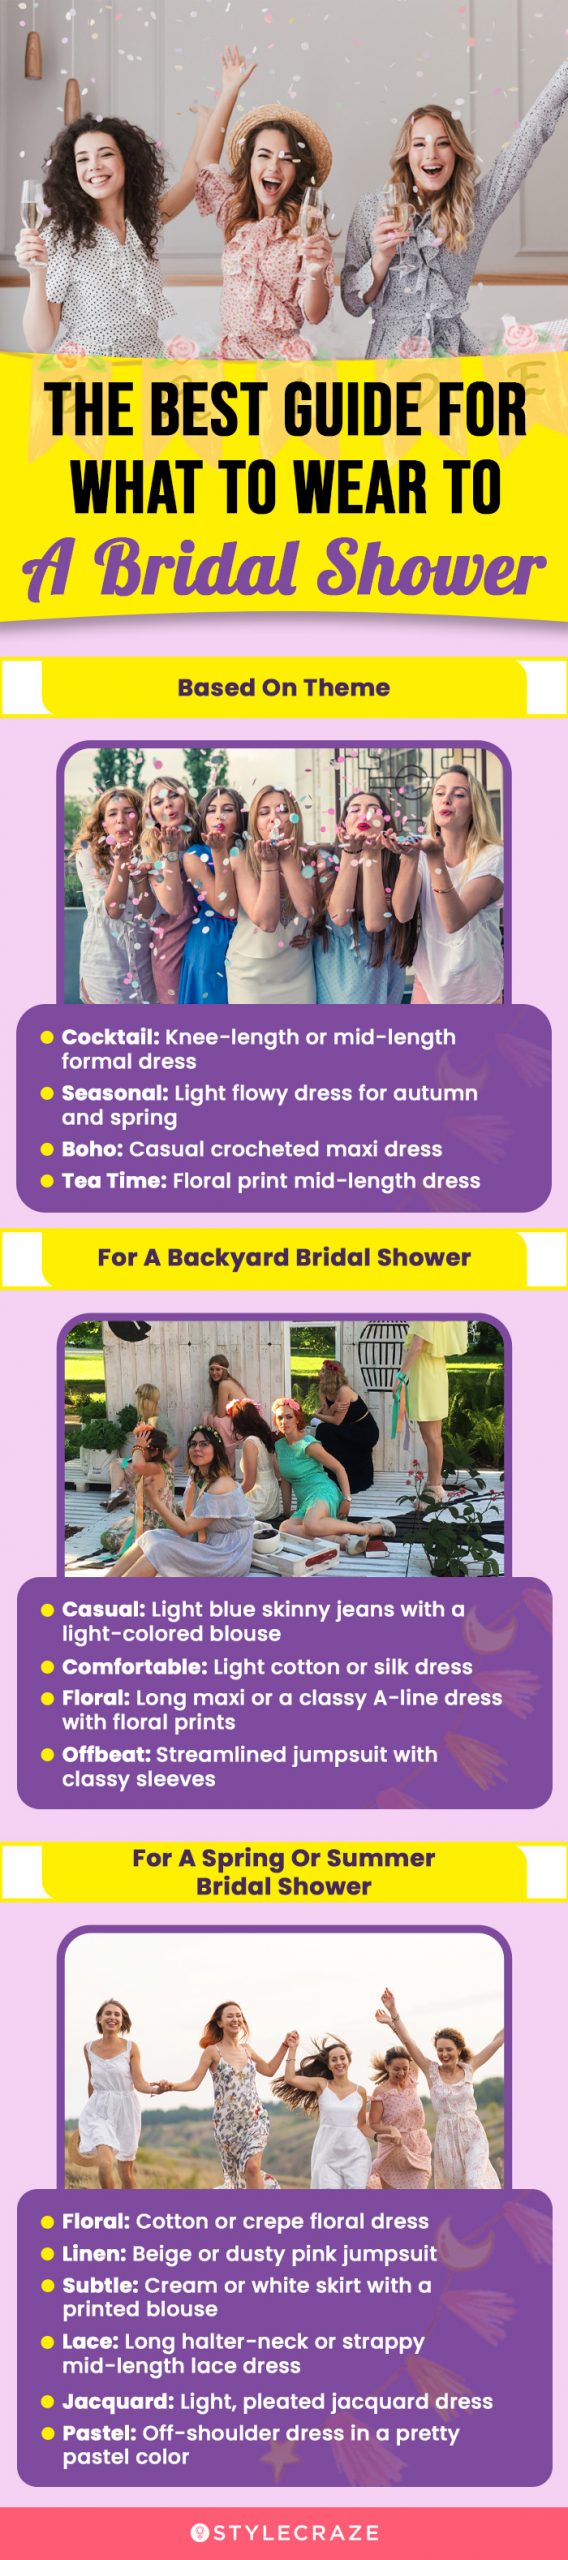 the best guide for what to wear to a bridal shower (infographic)